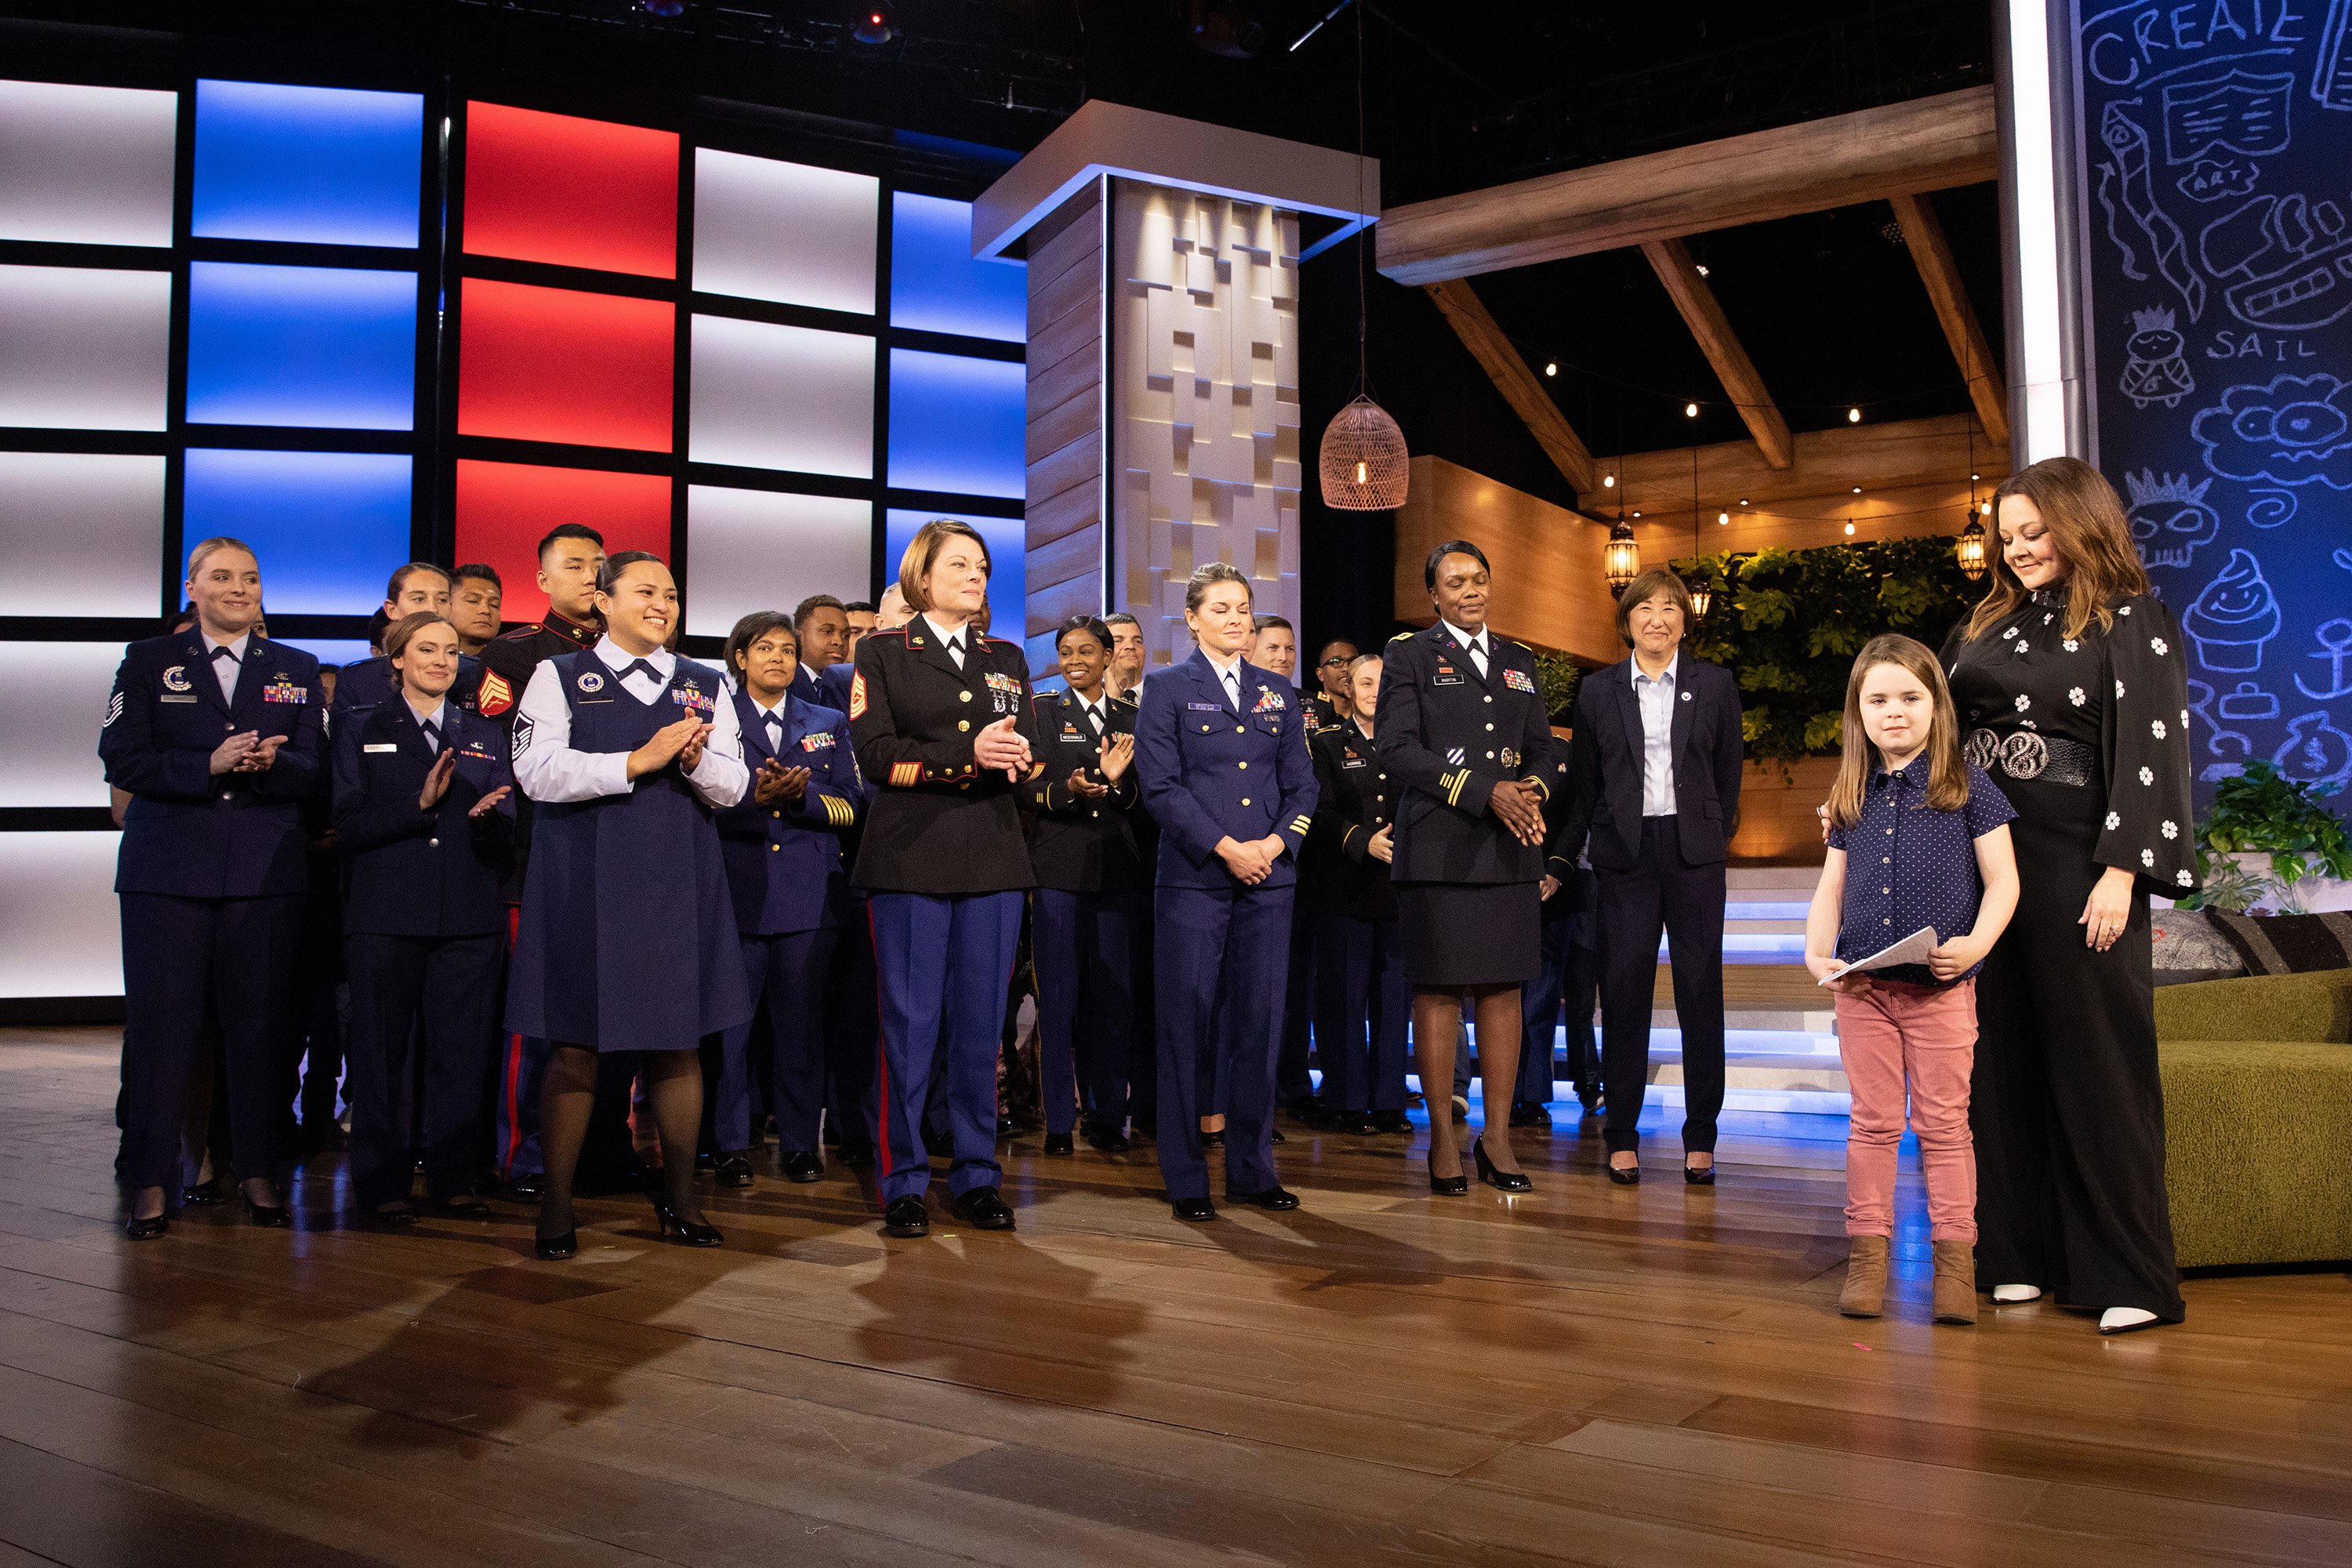 Representatives of the US Military, Vivian Falcone, and Melissa McCarthy on "Little Big Shots with Melissa McCarthy" on April 23, 2020. | Source: Getty Images